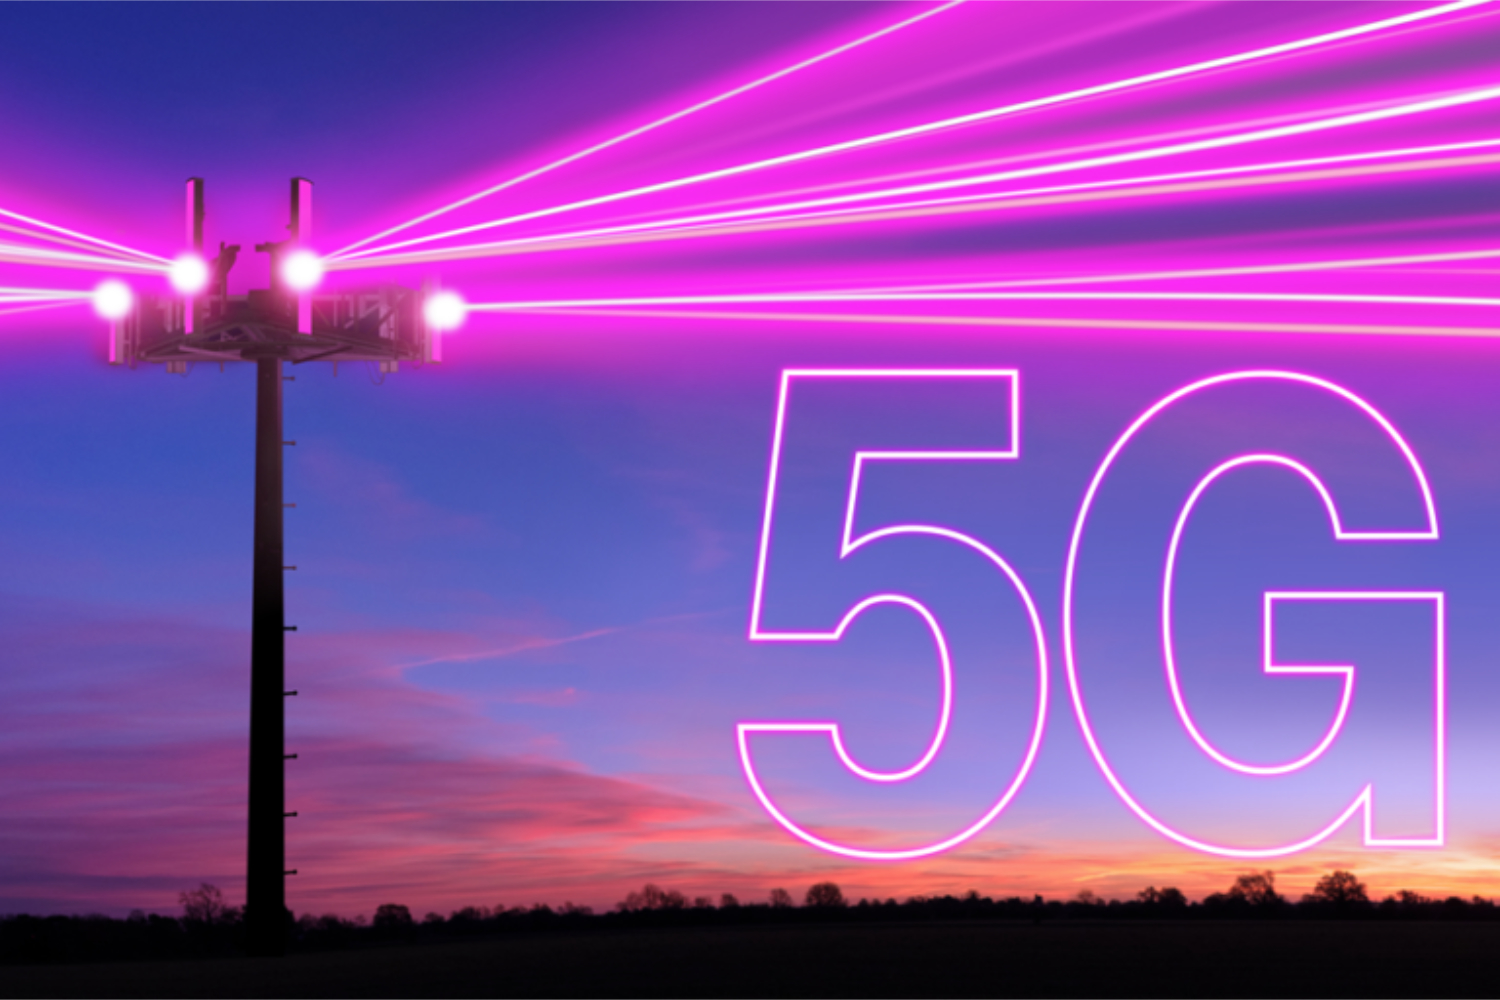 Cell phone tower shooting off pink beams with a 5G logo next to it.